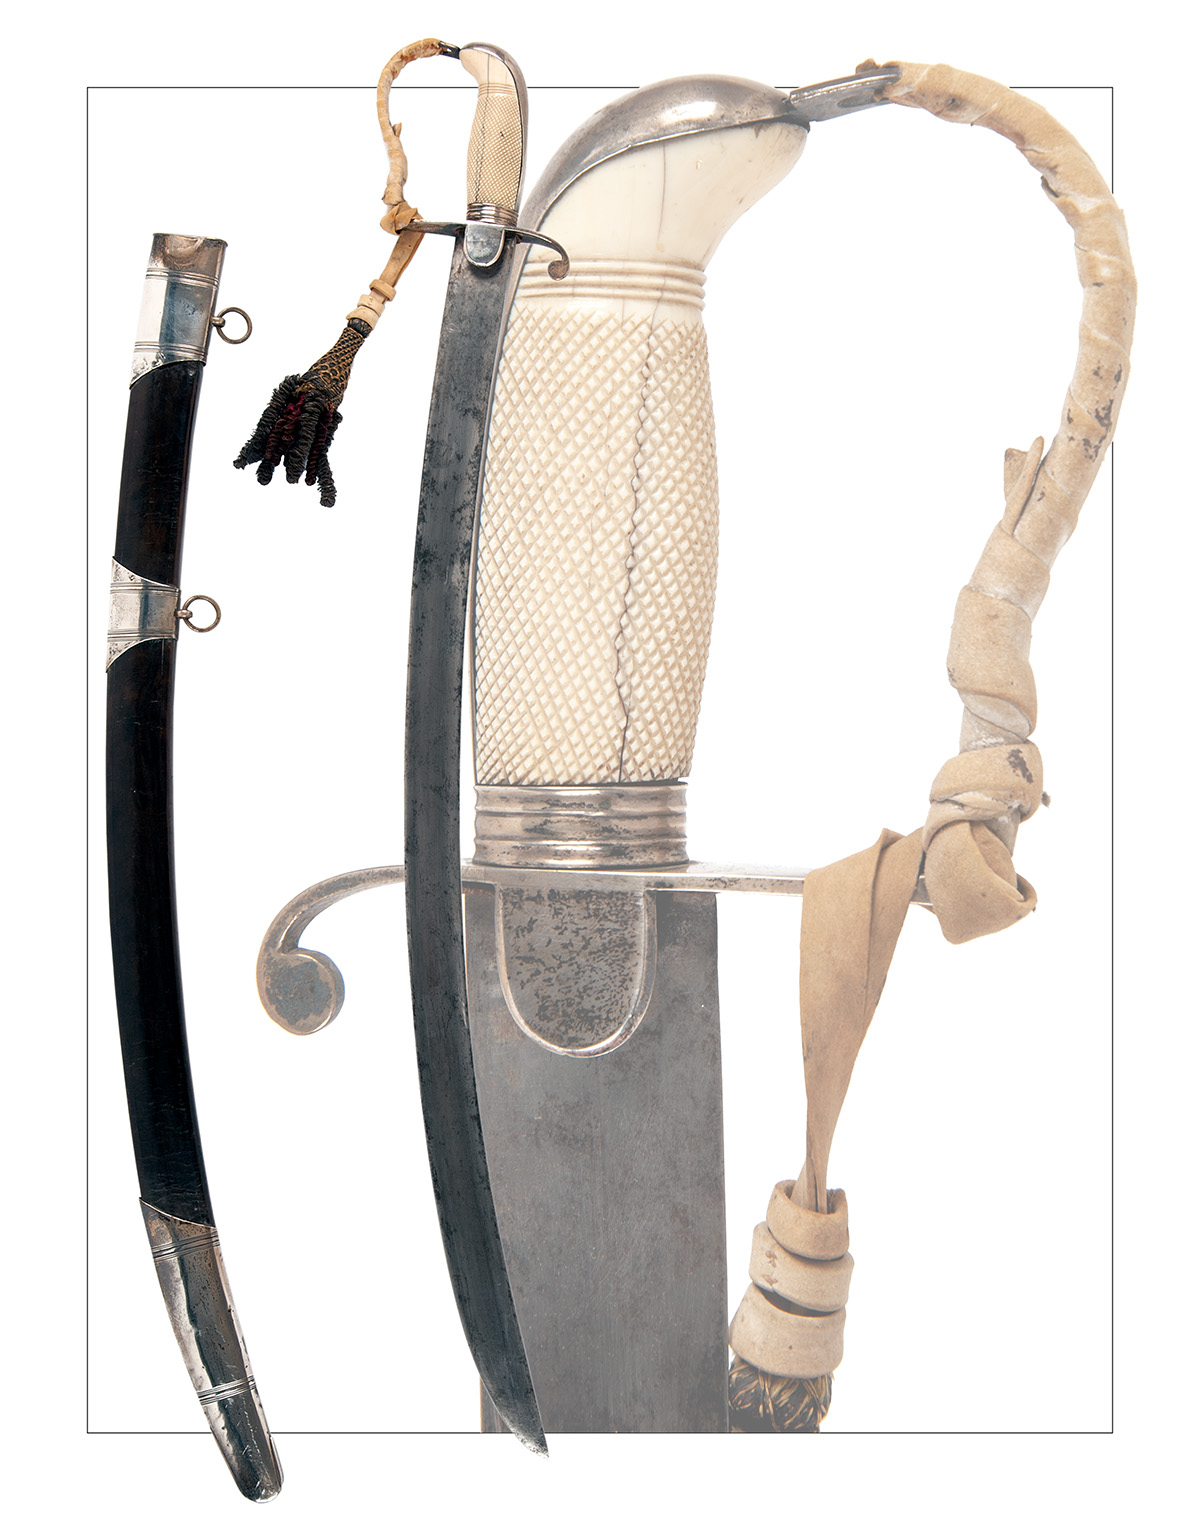 A BRITISH LIGHT CAVALRY OFFICER'S SILVER AND IVORY MOUNTED SWORD, UNSIGNED, circa 1800 but not